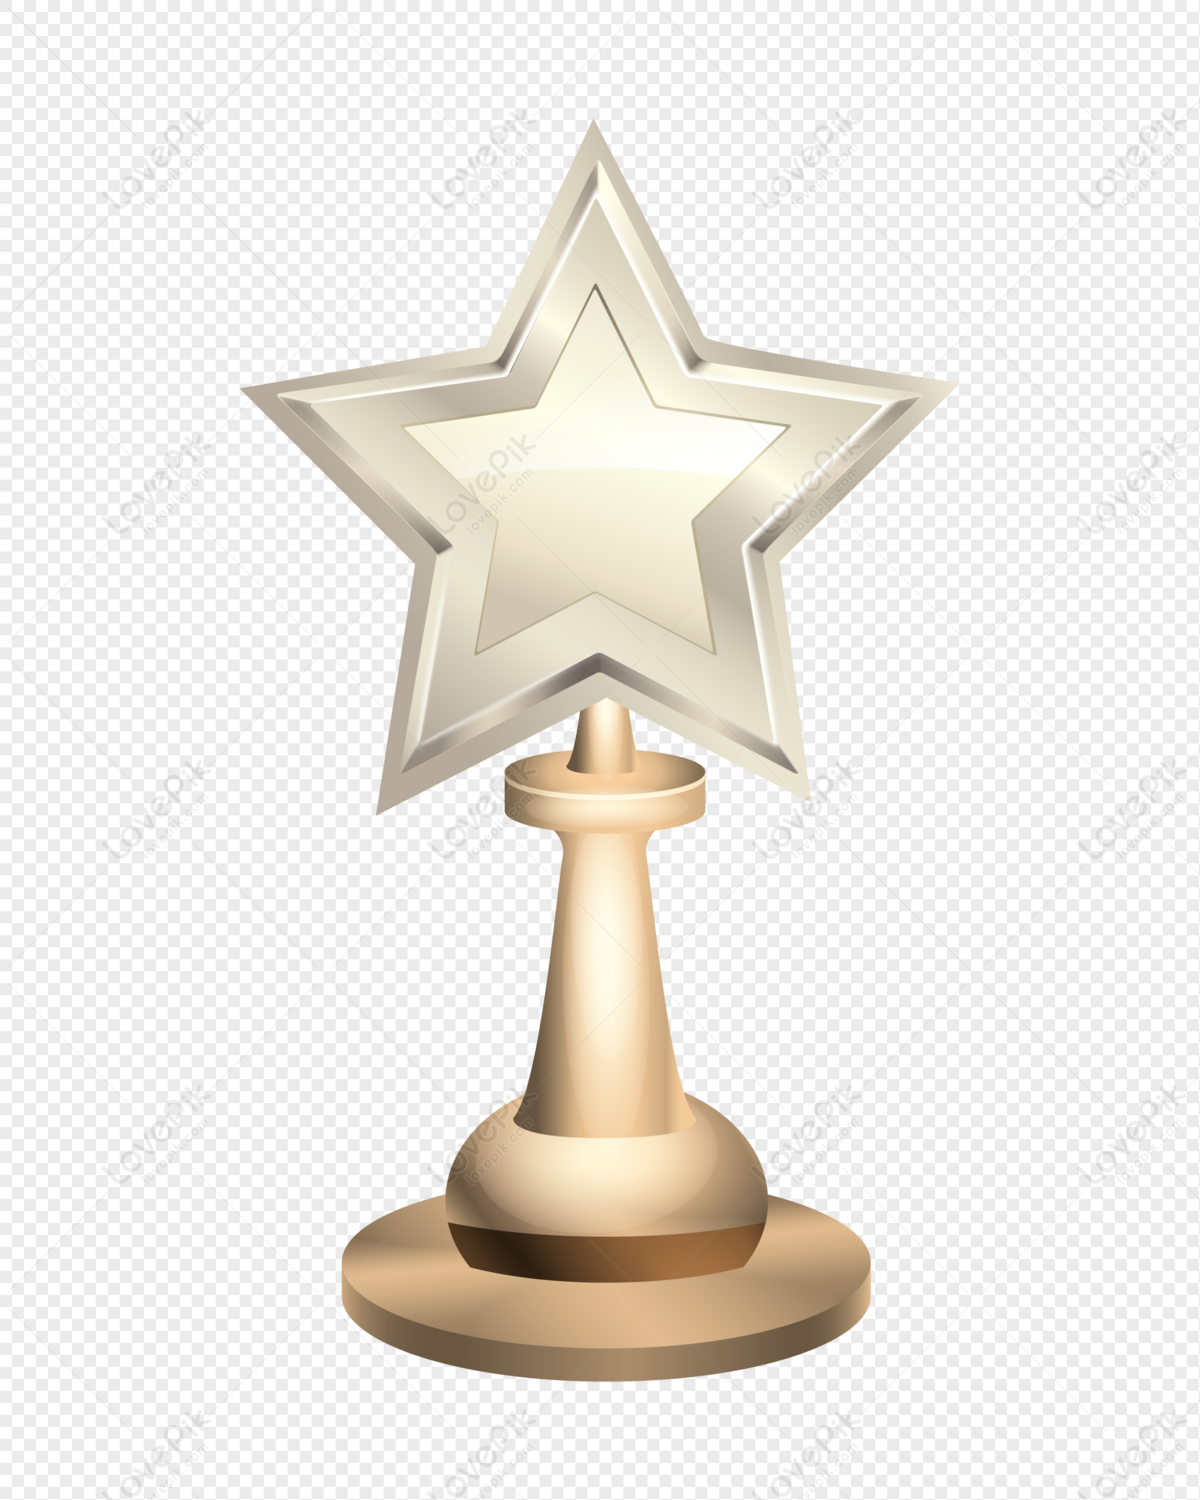 Trophy PNG Free Download And Clipart Image For Free Download - Lovepik